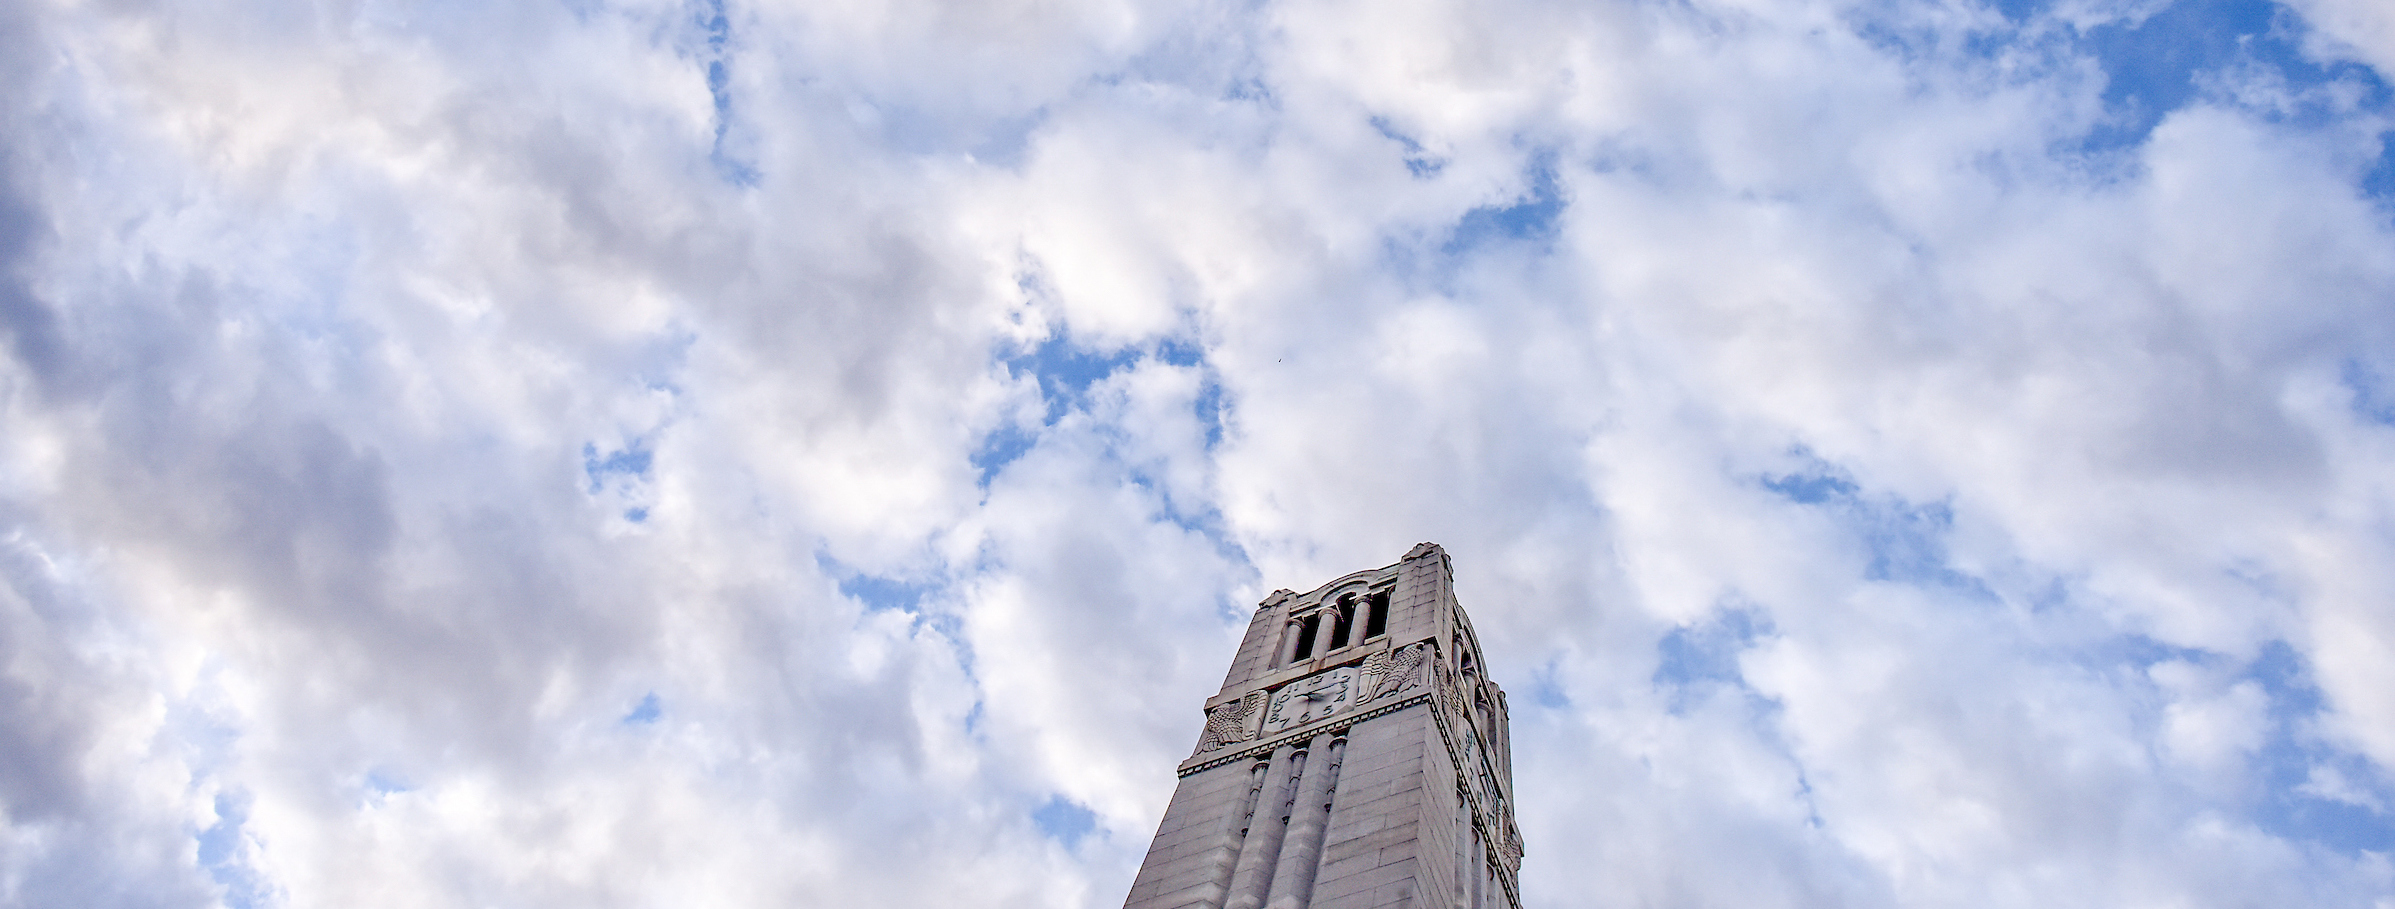 Belltower and cloudy sky